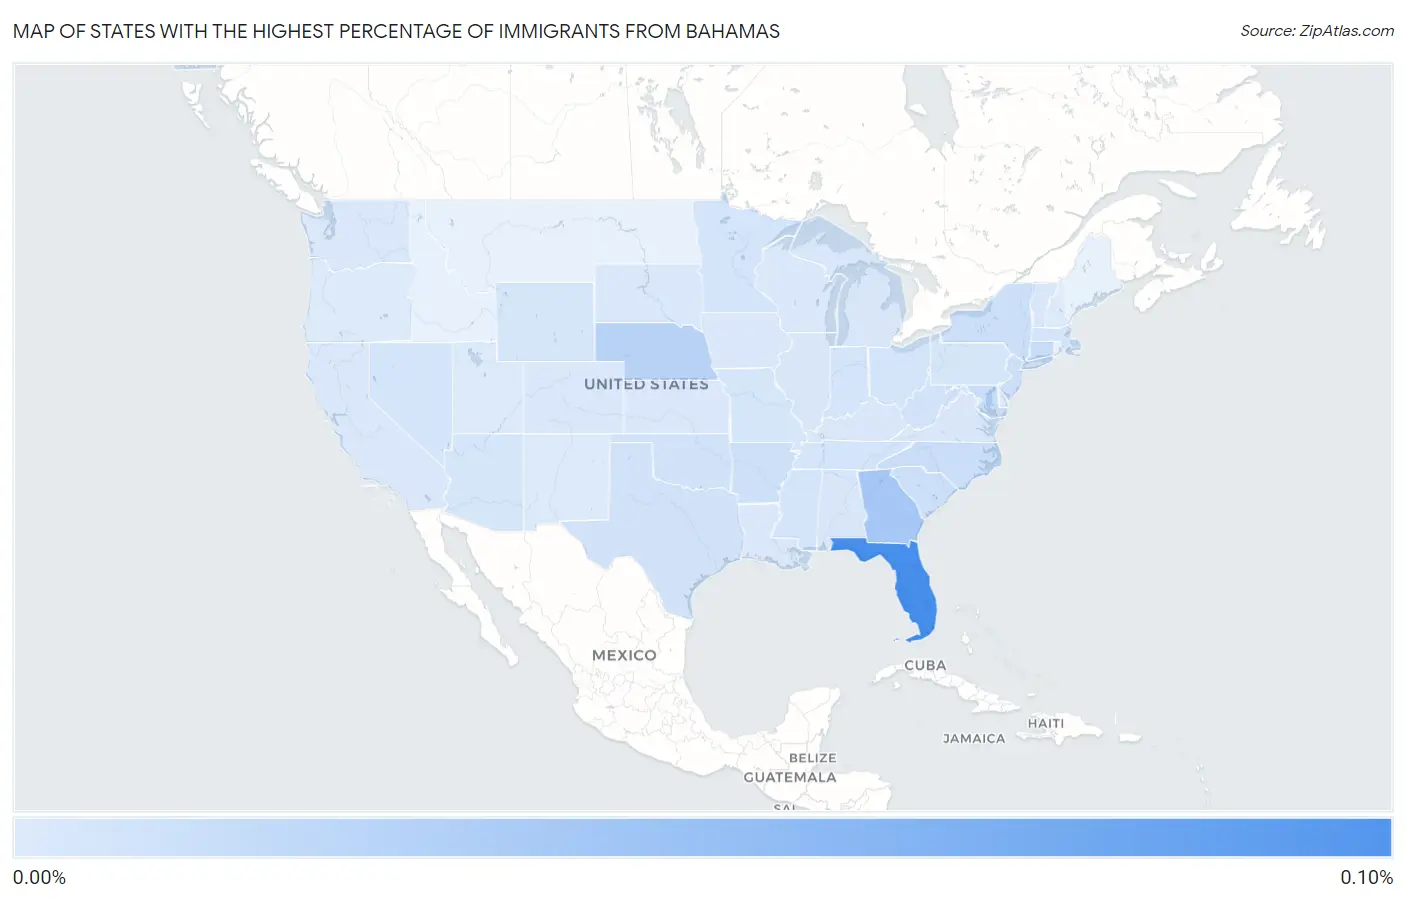 States with the Highest Percentage of Immigrants from Bahamas in the United States Map